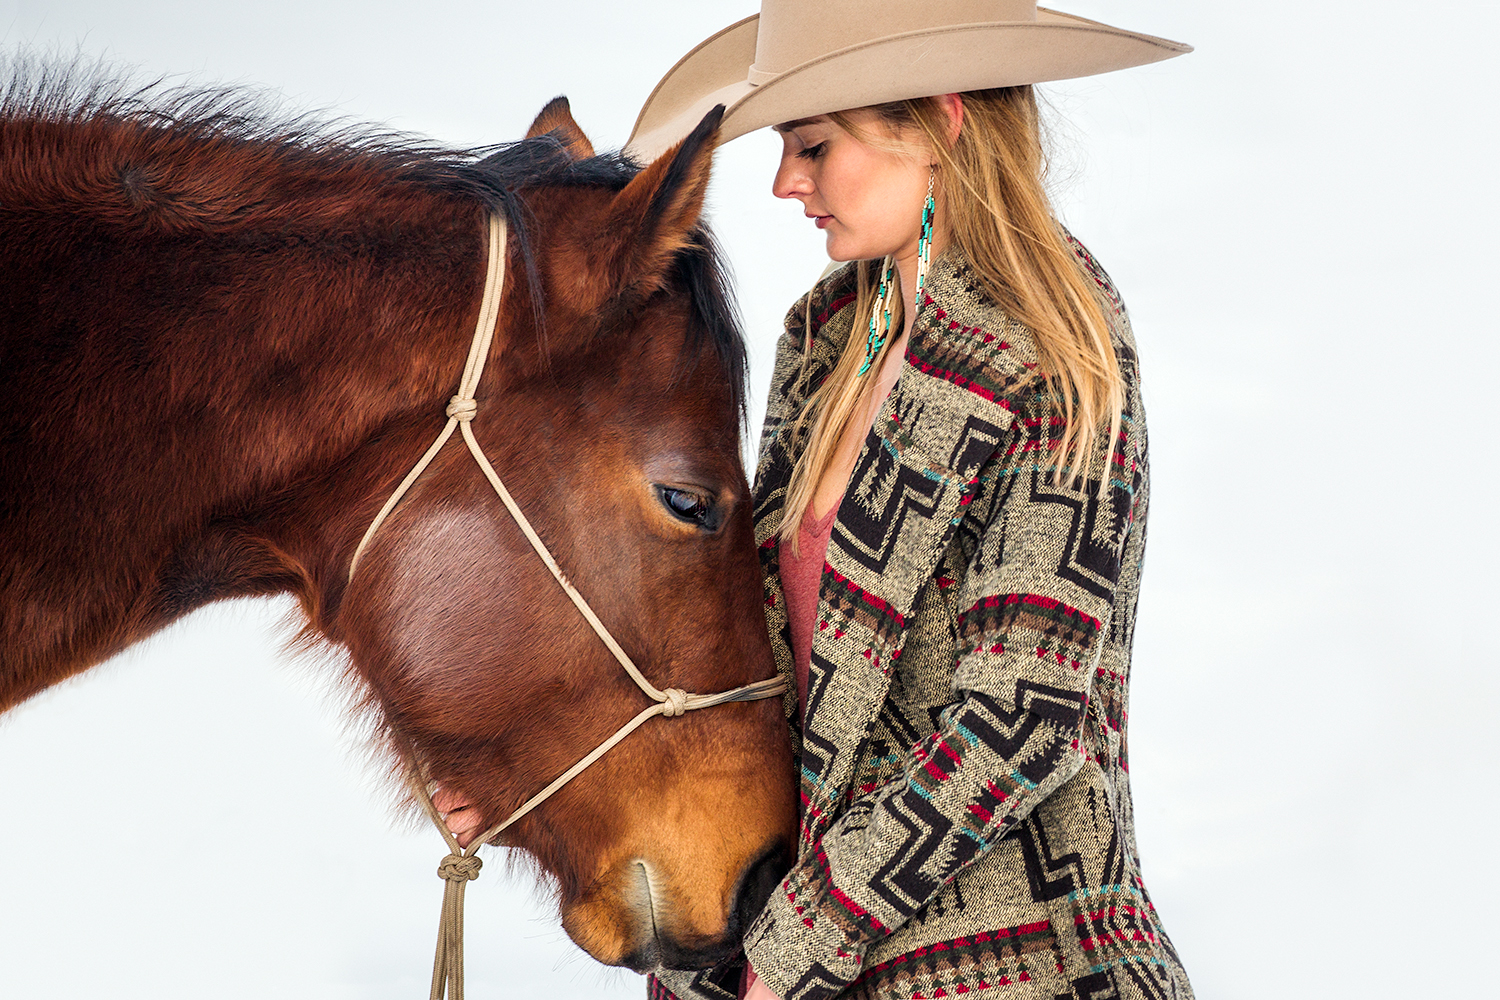 A cowgirl rubs the chin of her horse on a ranch outside of Bozeman, Montana.&nbsp;→ License Photo